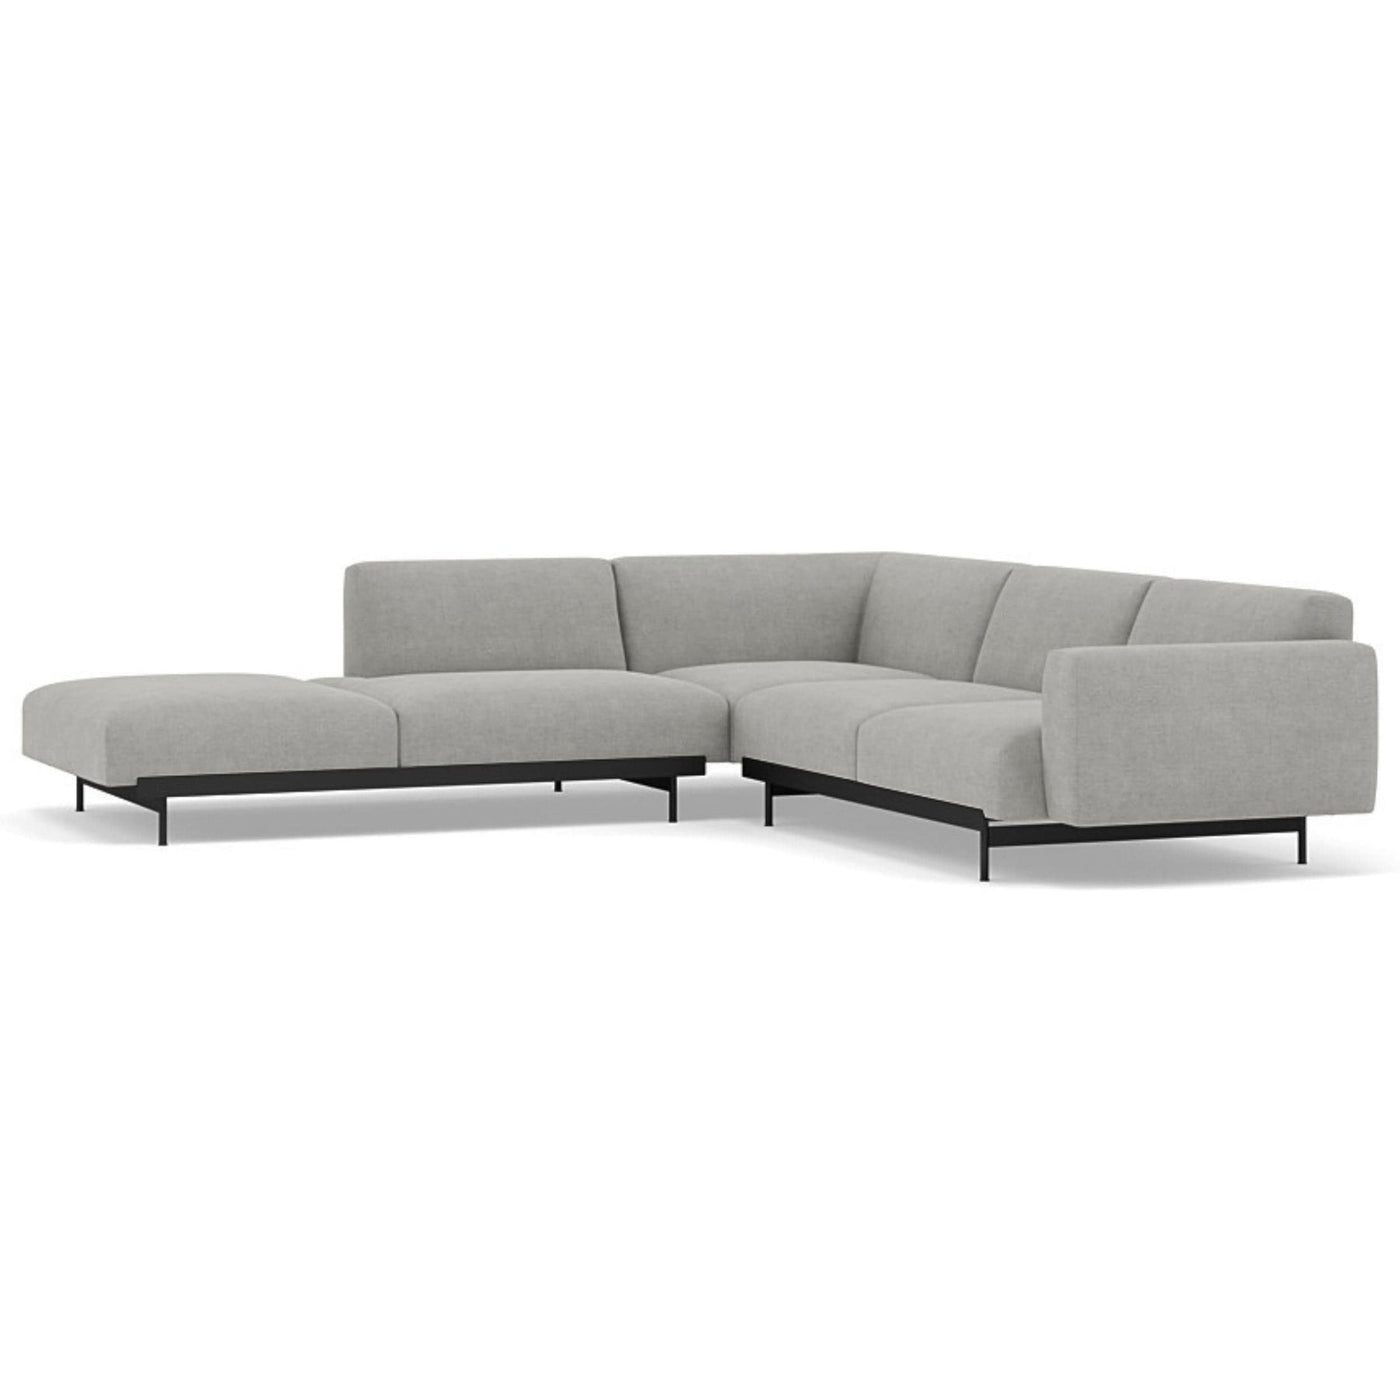 Muuto In Situ Modular Corner Sofa 2. Made to order  from someday designs. #colour_fiord-151